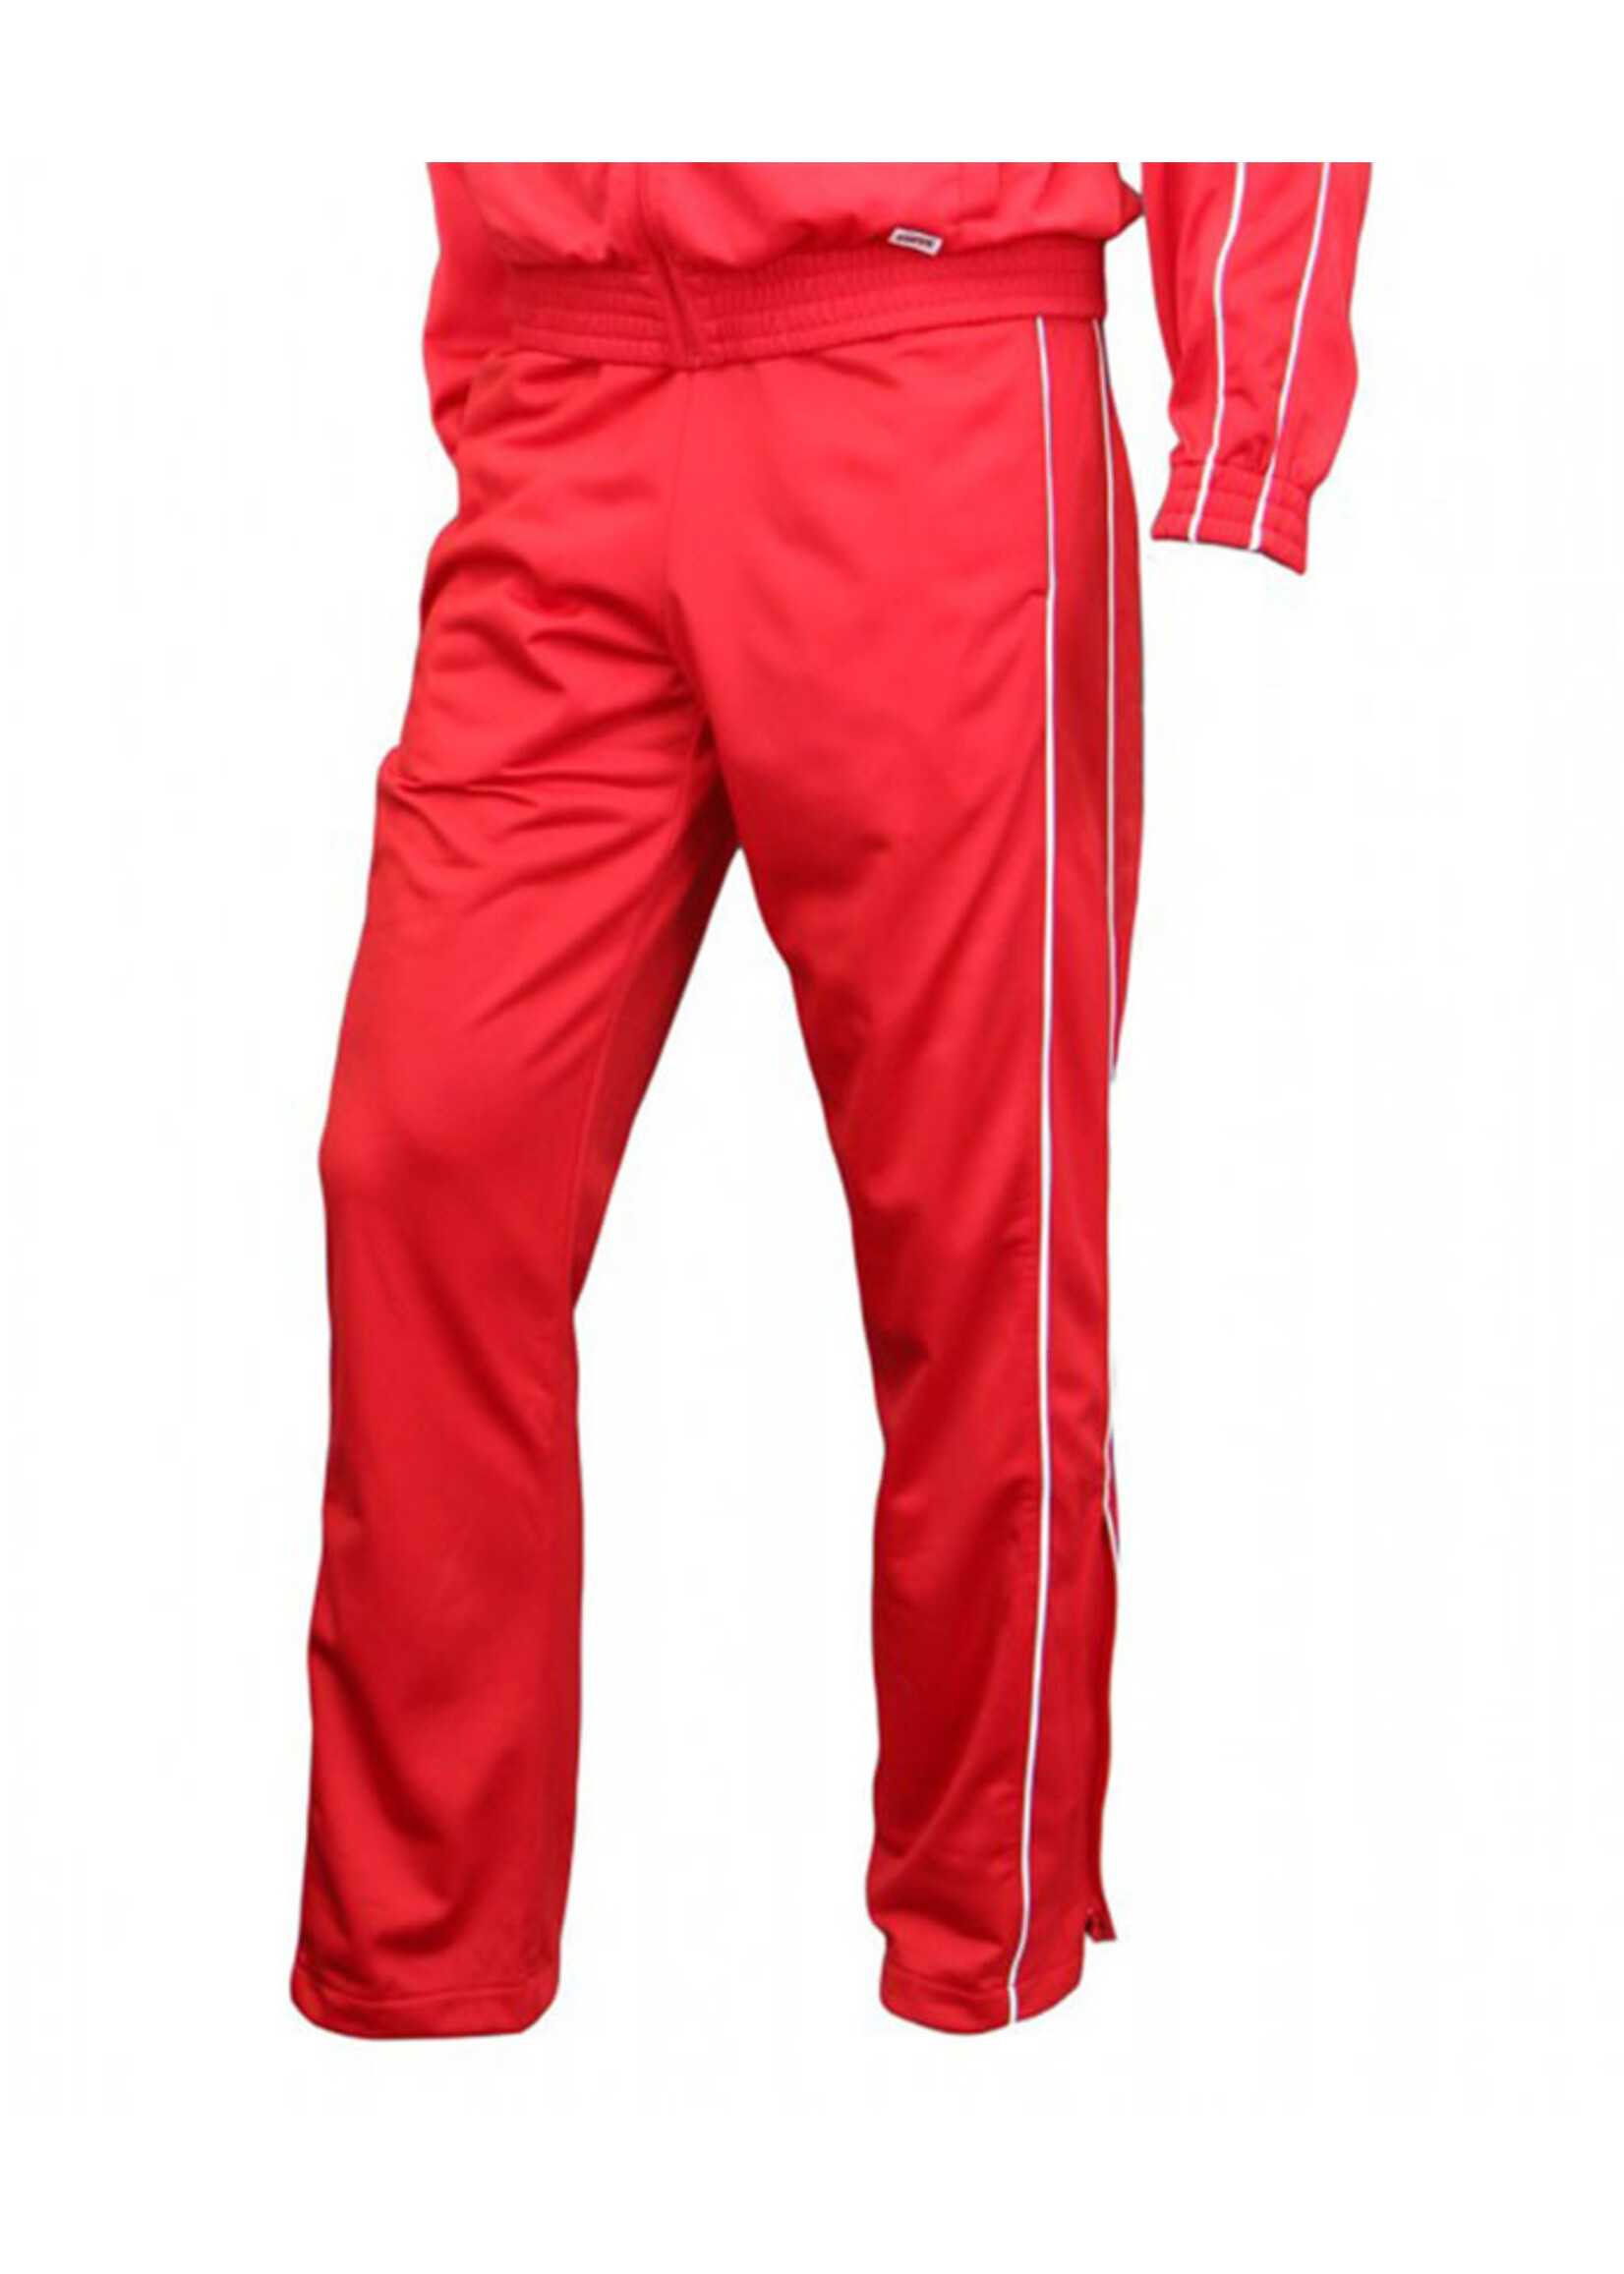 3245 Tricot Warm Up Pants RD Red - The Uniform Store